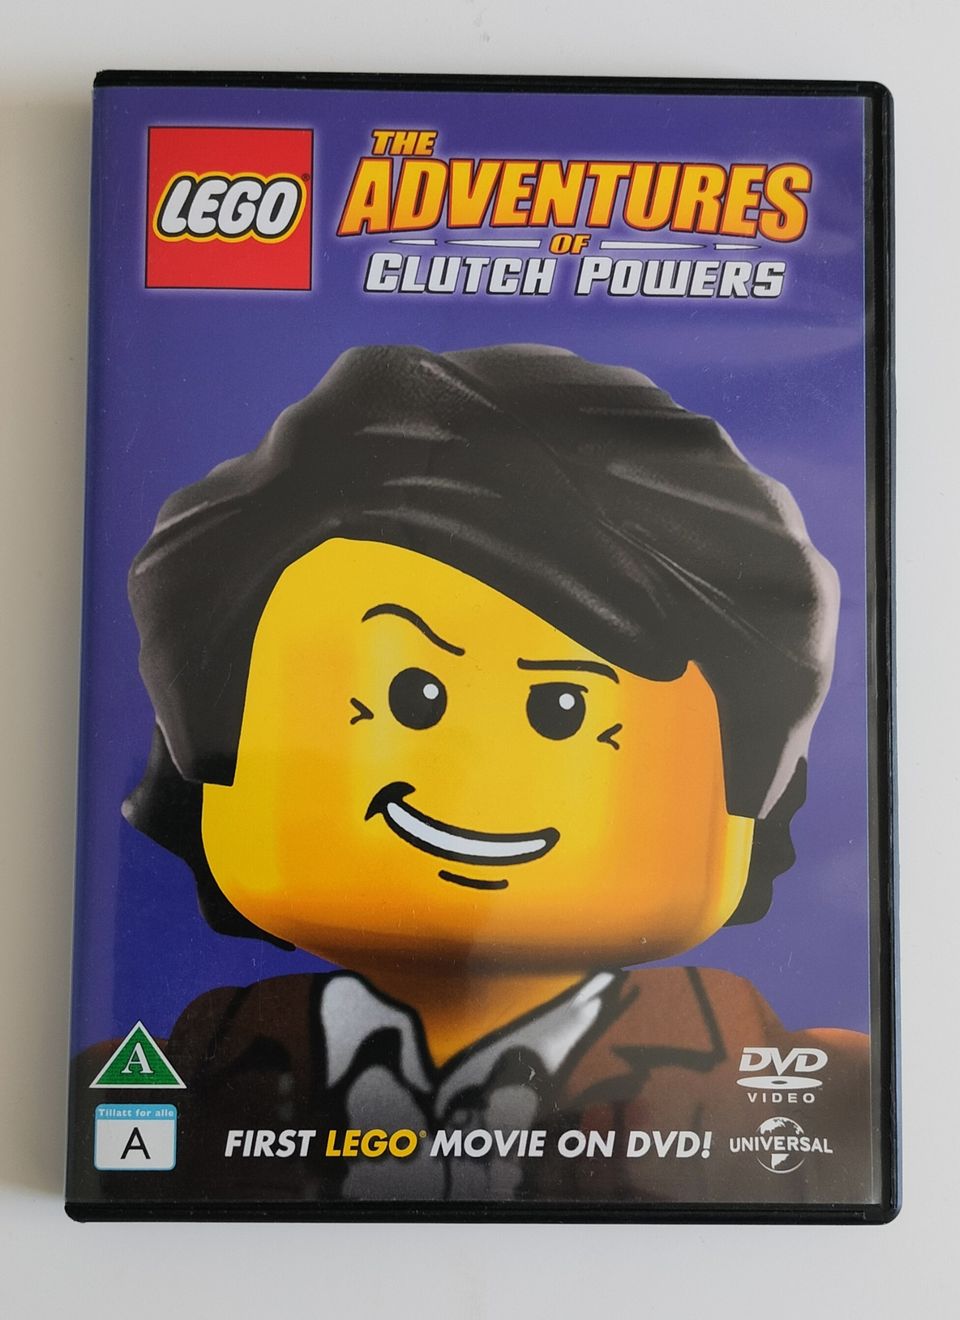 Lego The Adventures of clutch powers, DVD